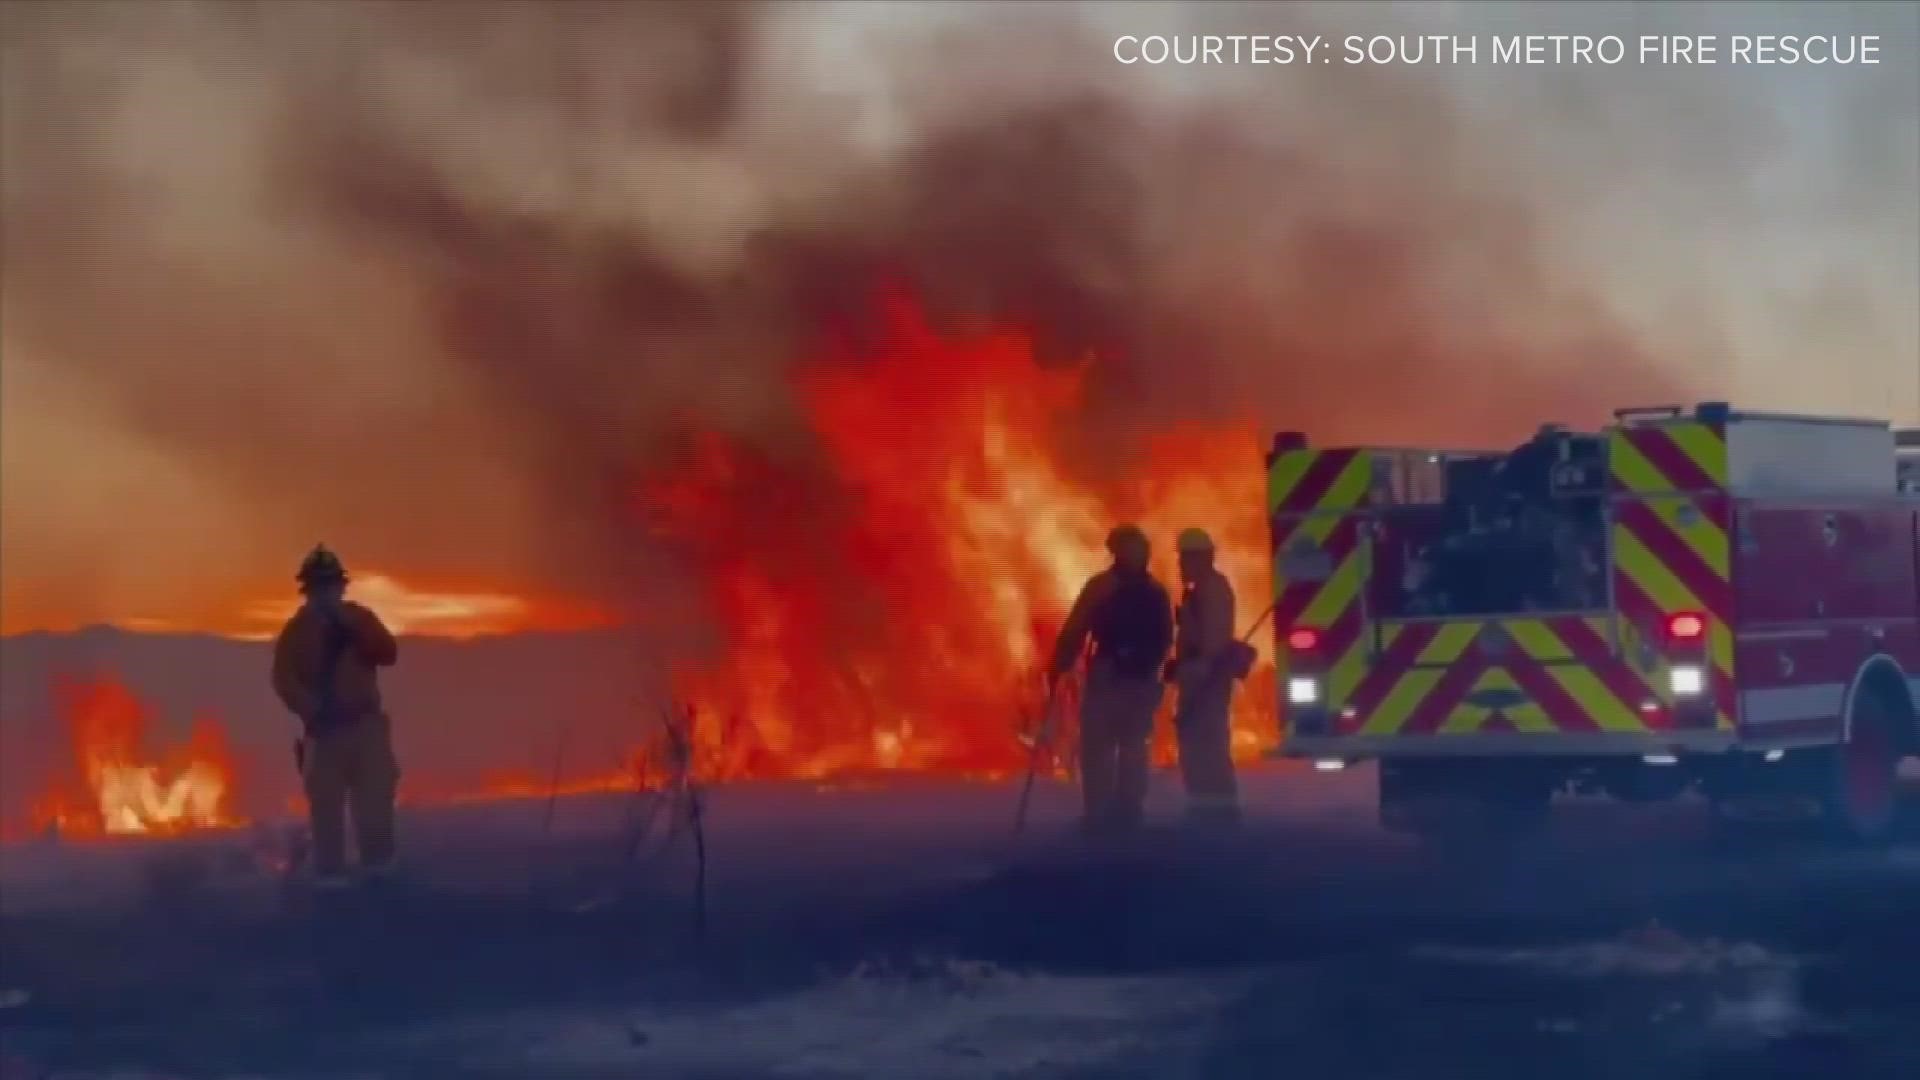 This is archival footage of wildfires being fought by South Metro Fire.